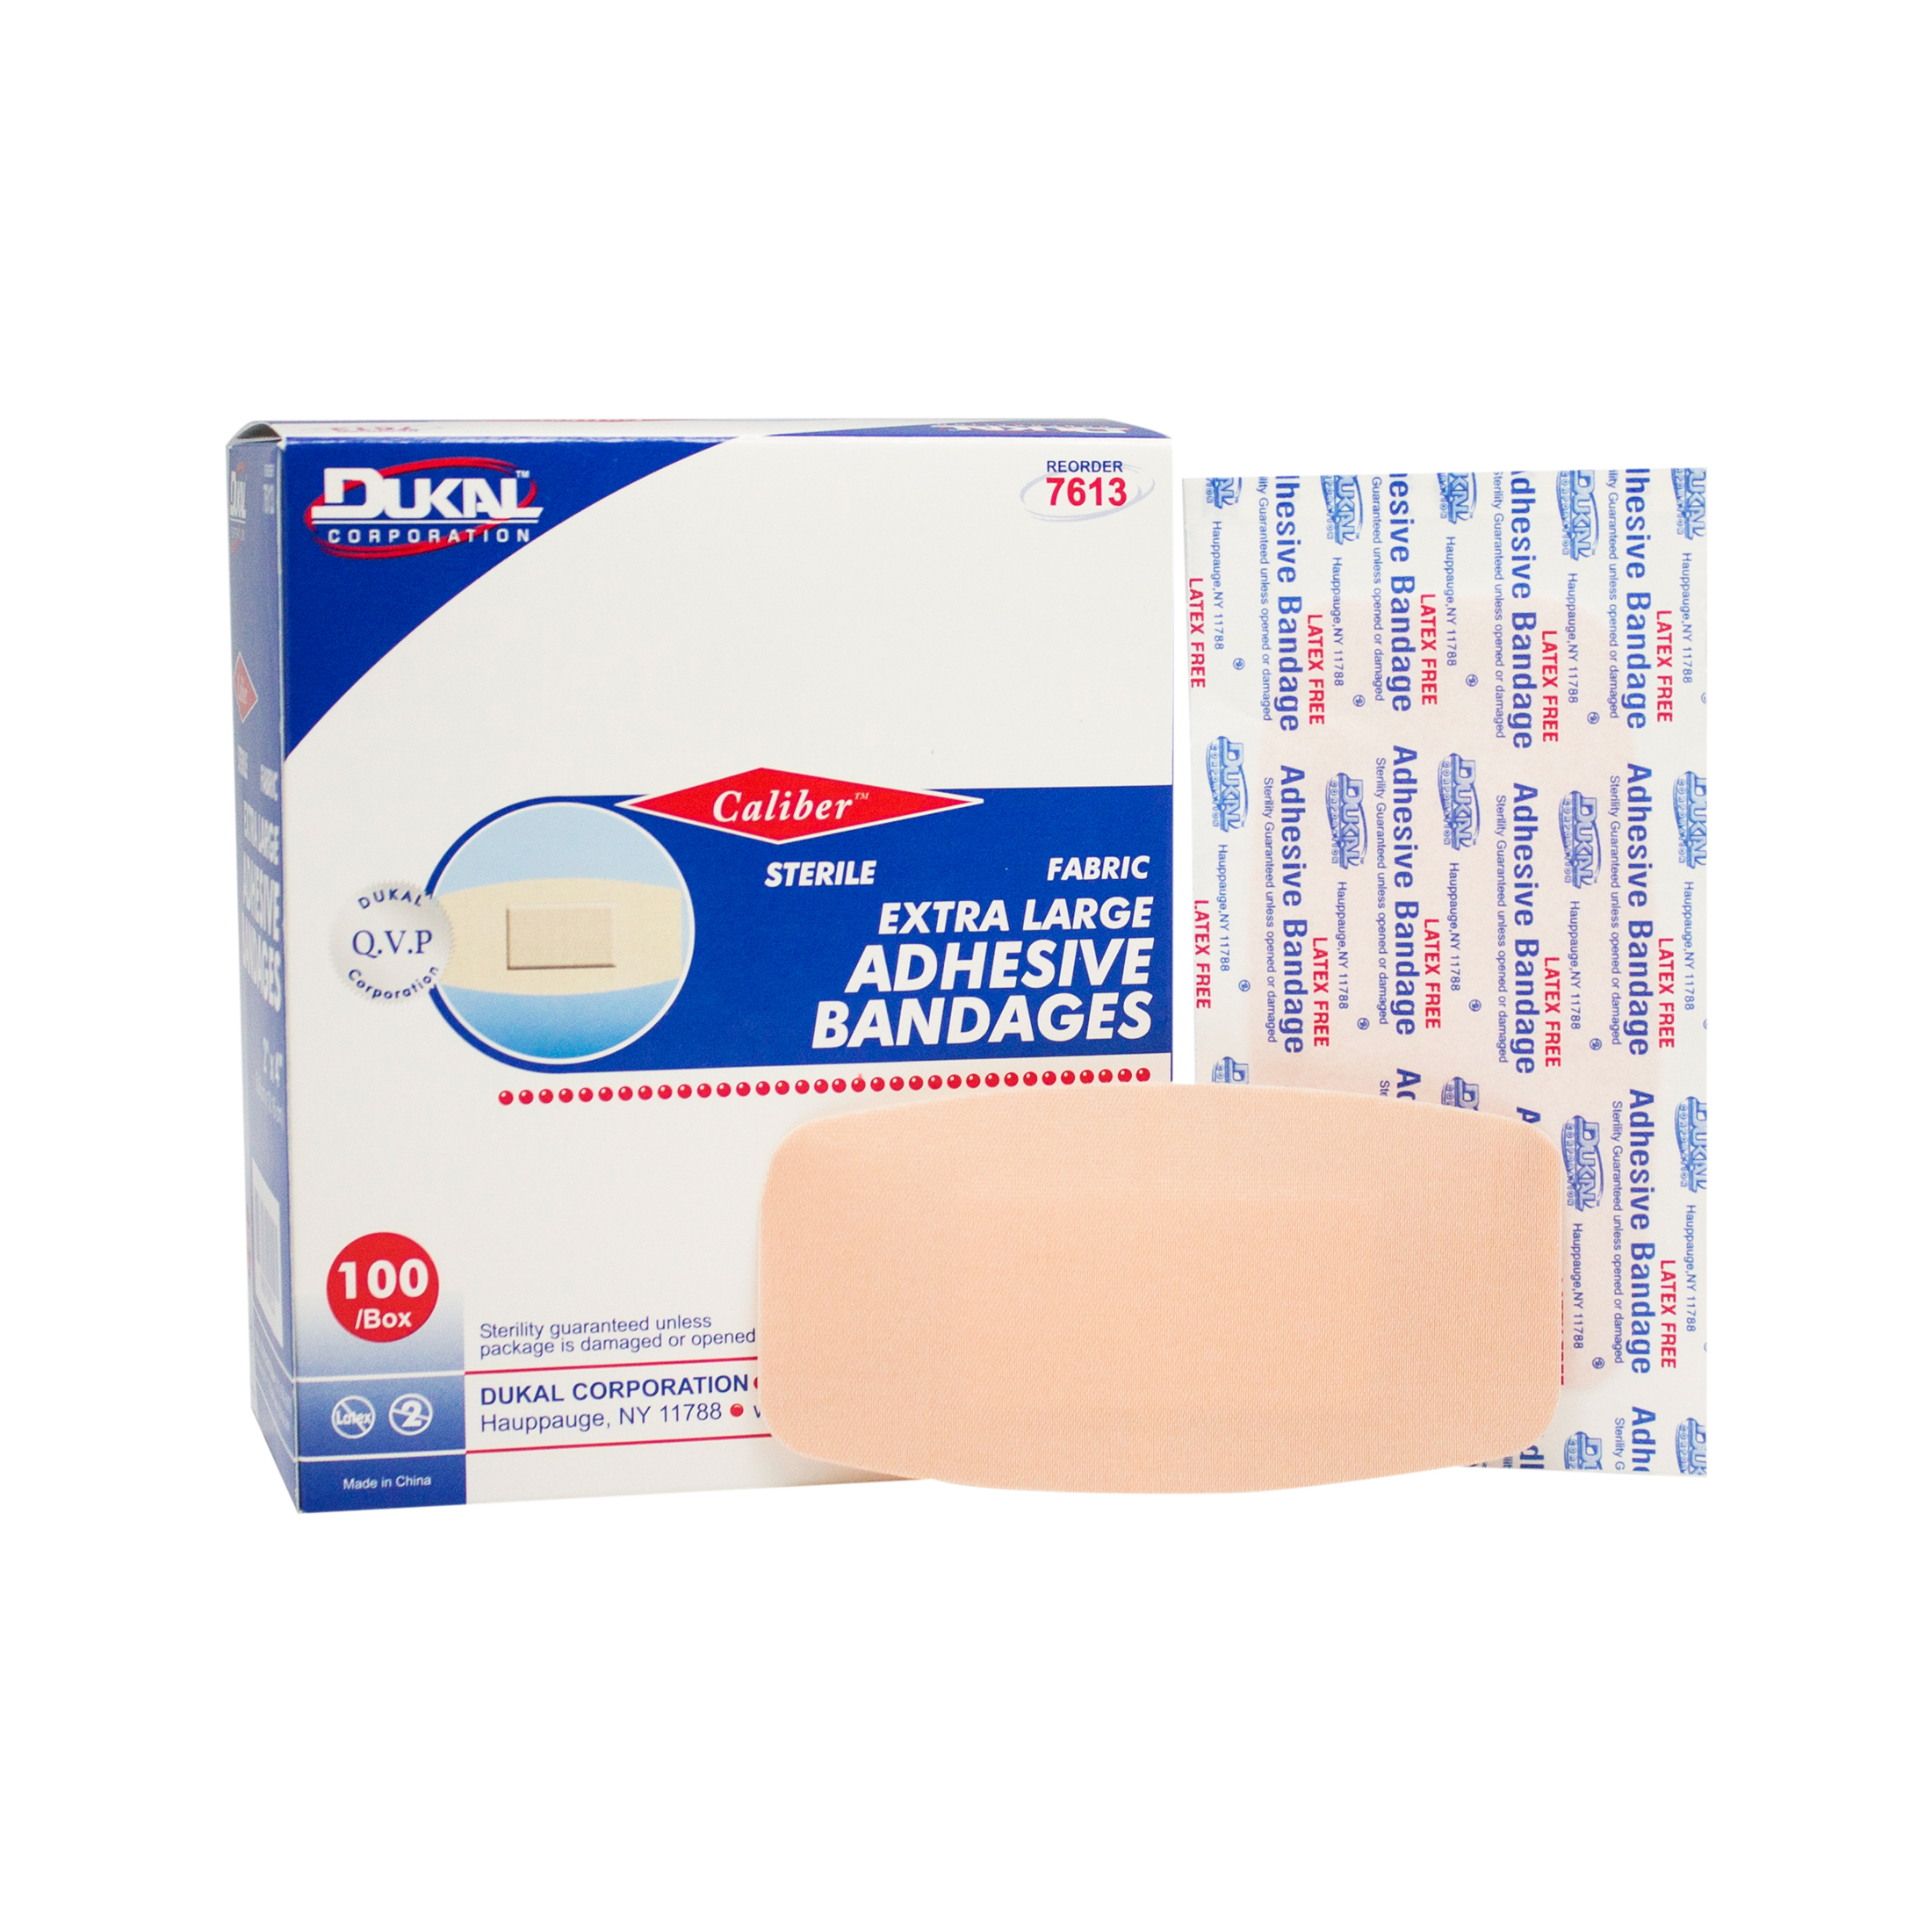 2" x 4" Adhesive Bandages Products, Supplies and Equipment